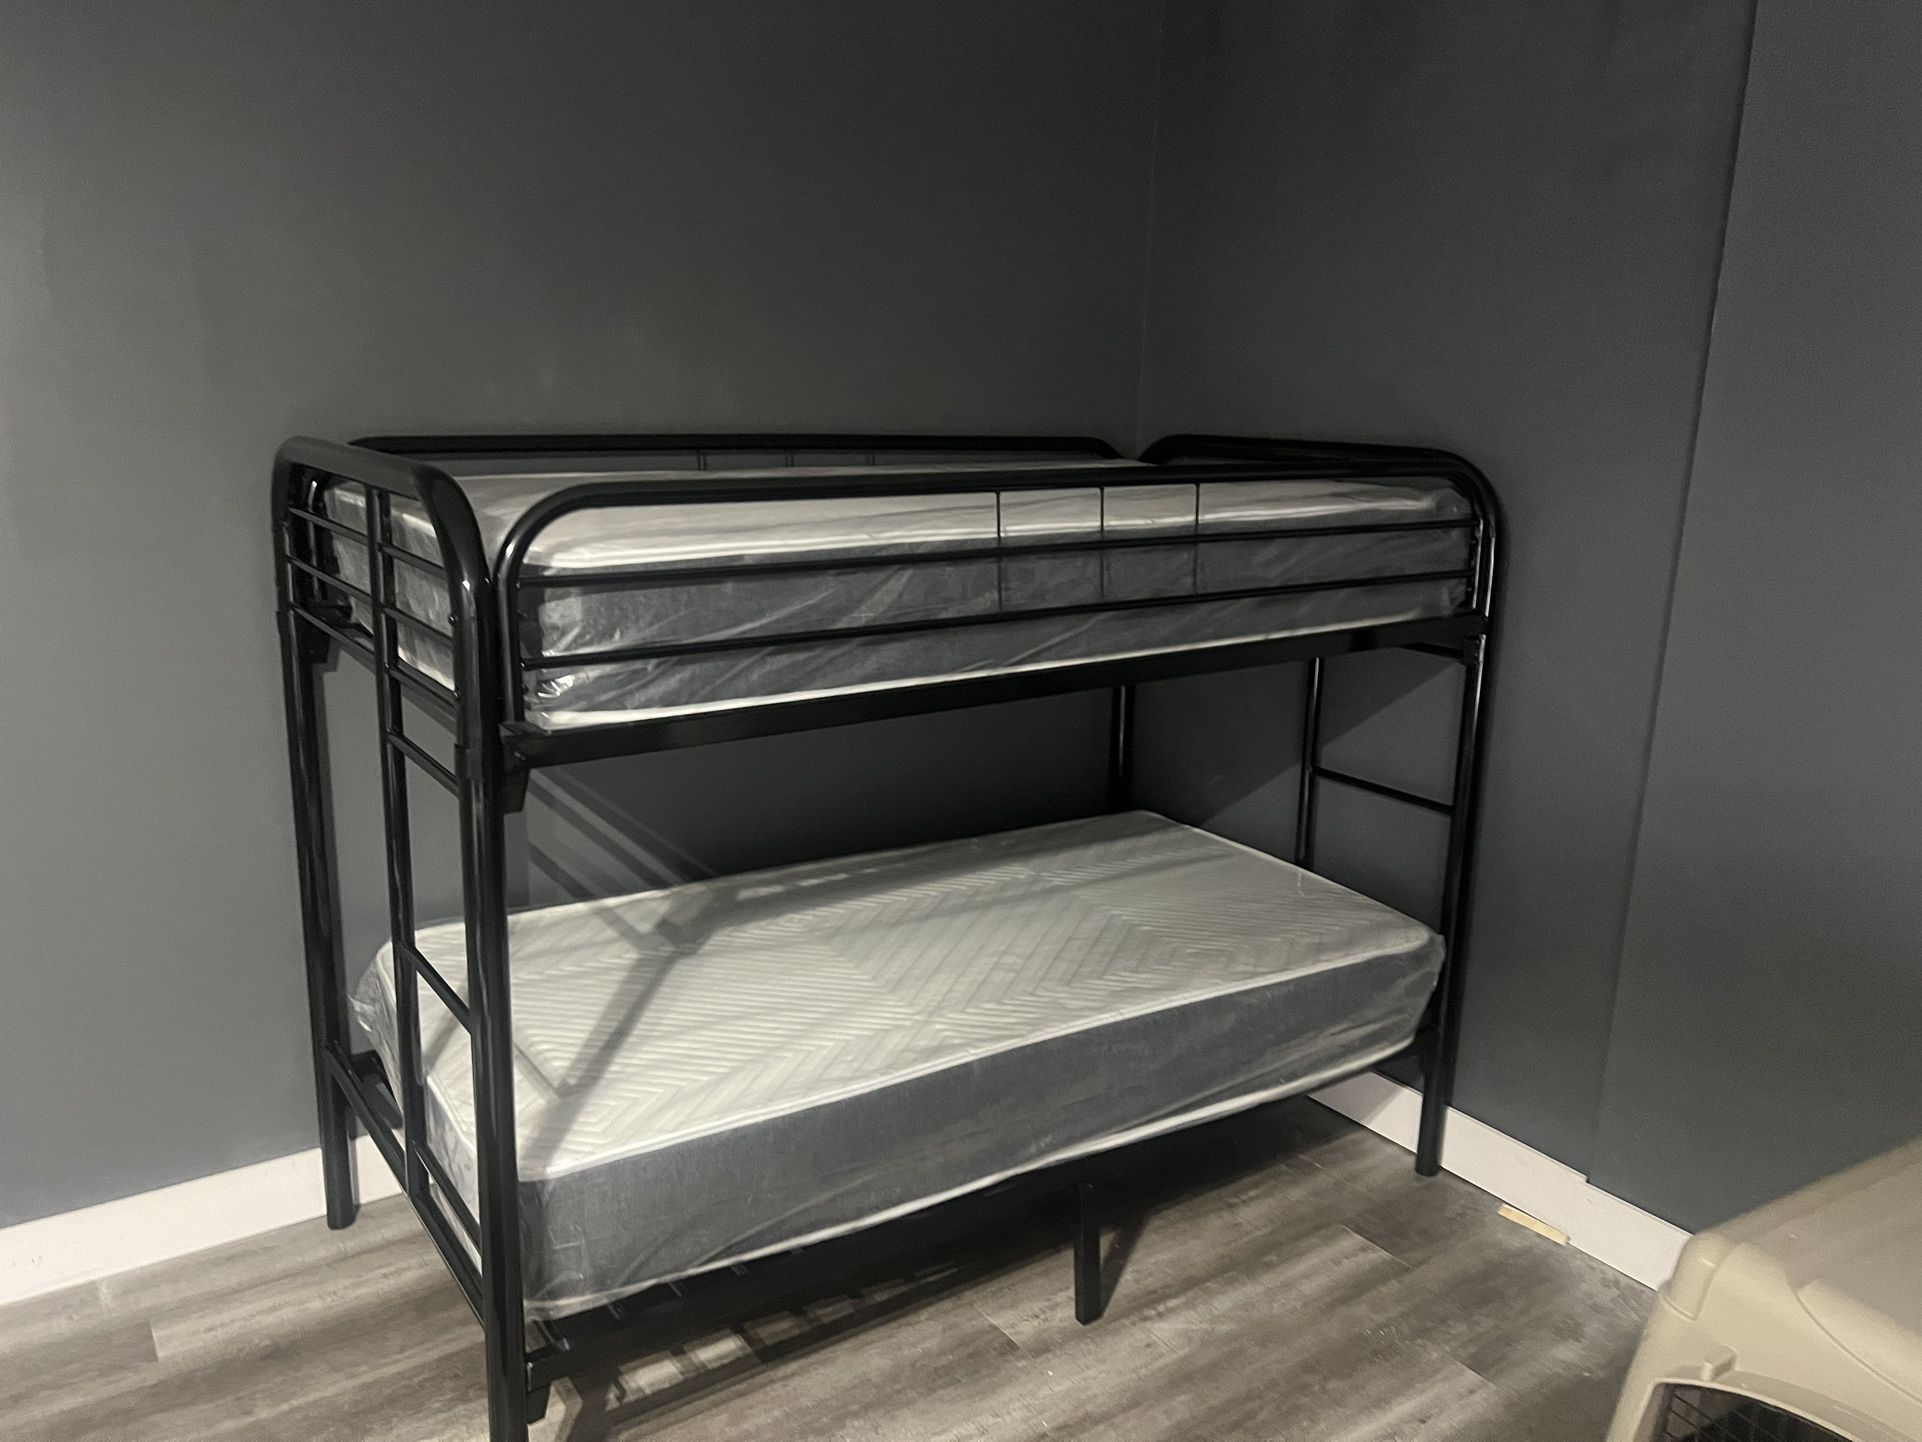 Twin over Twin bunk beds frame and free delivery in box with the mattress and 